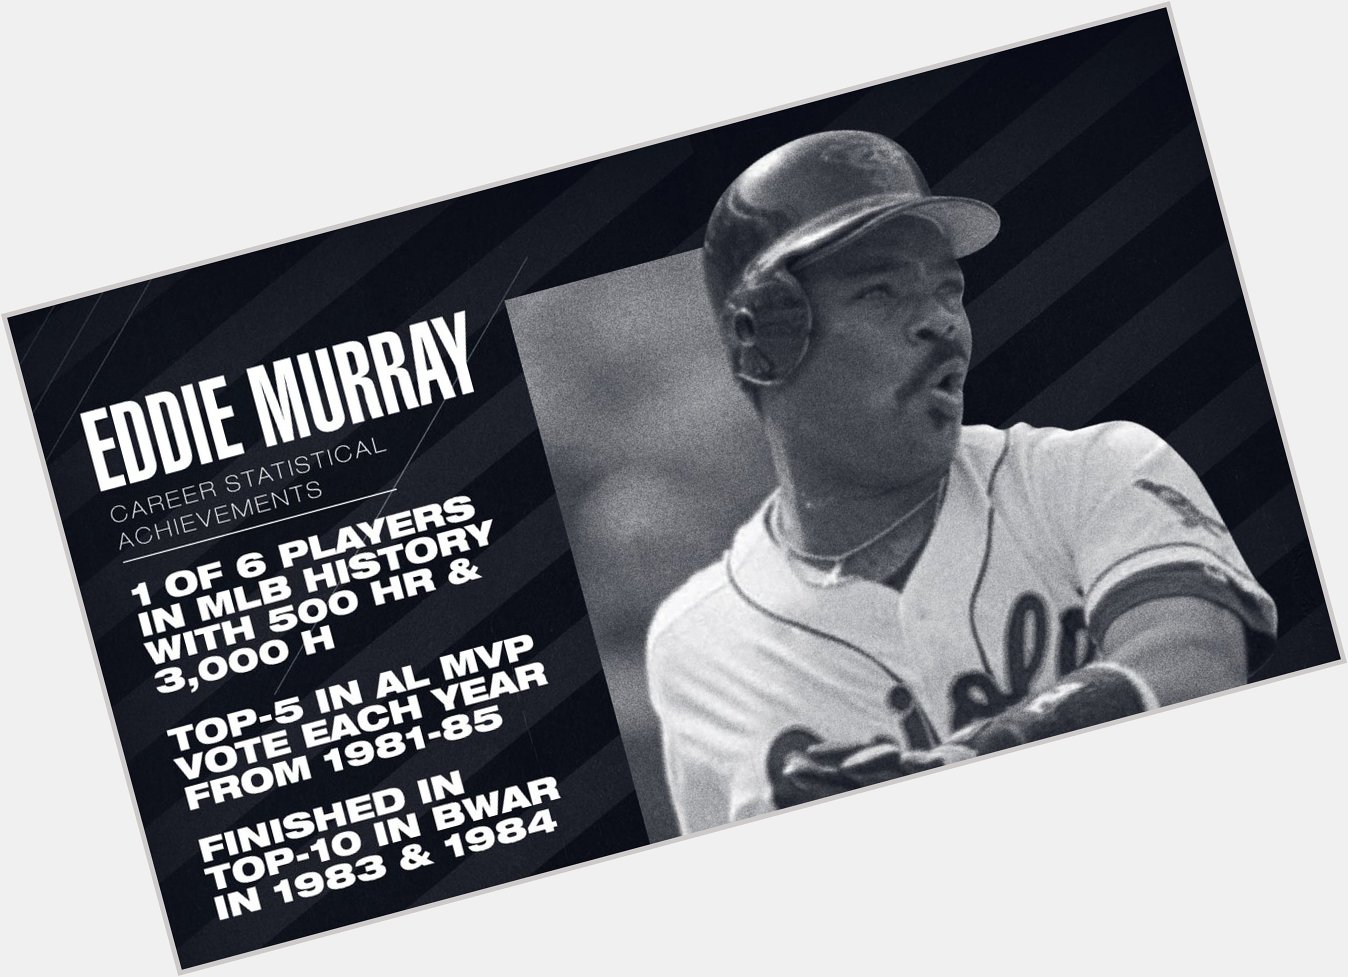 Happy birthday, Eddie Murray!

The 1st-ballot Hall-of-Famer was a force for over two decades. 